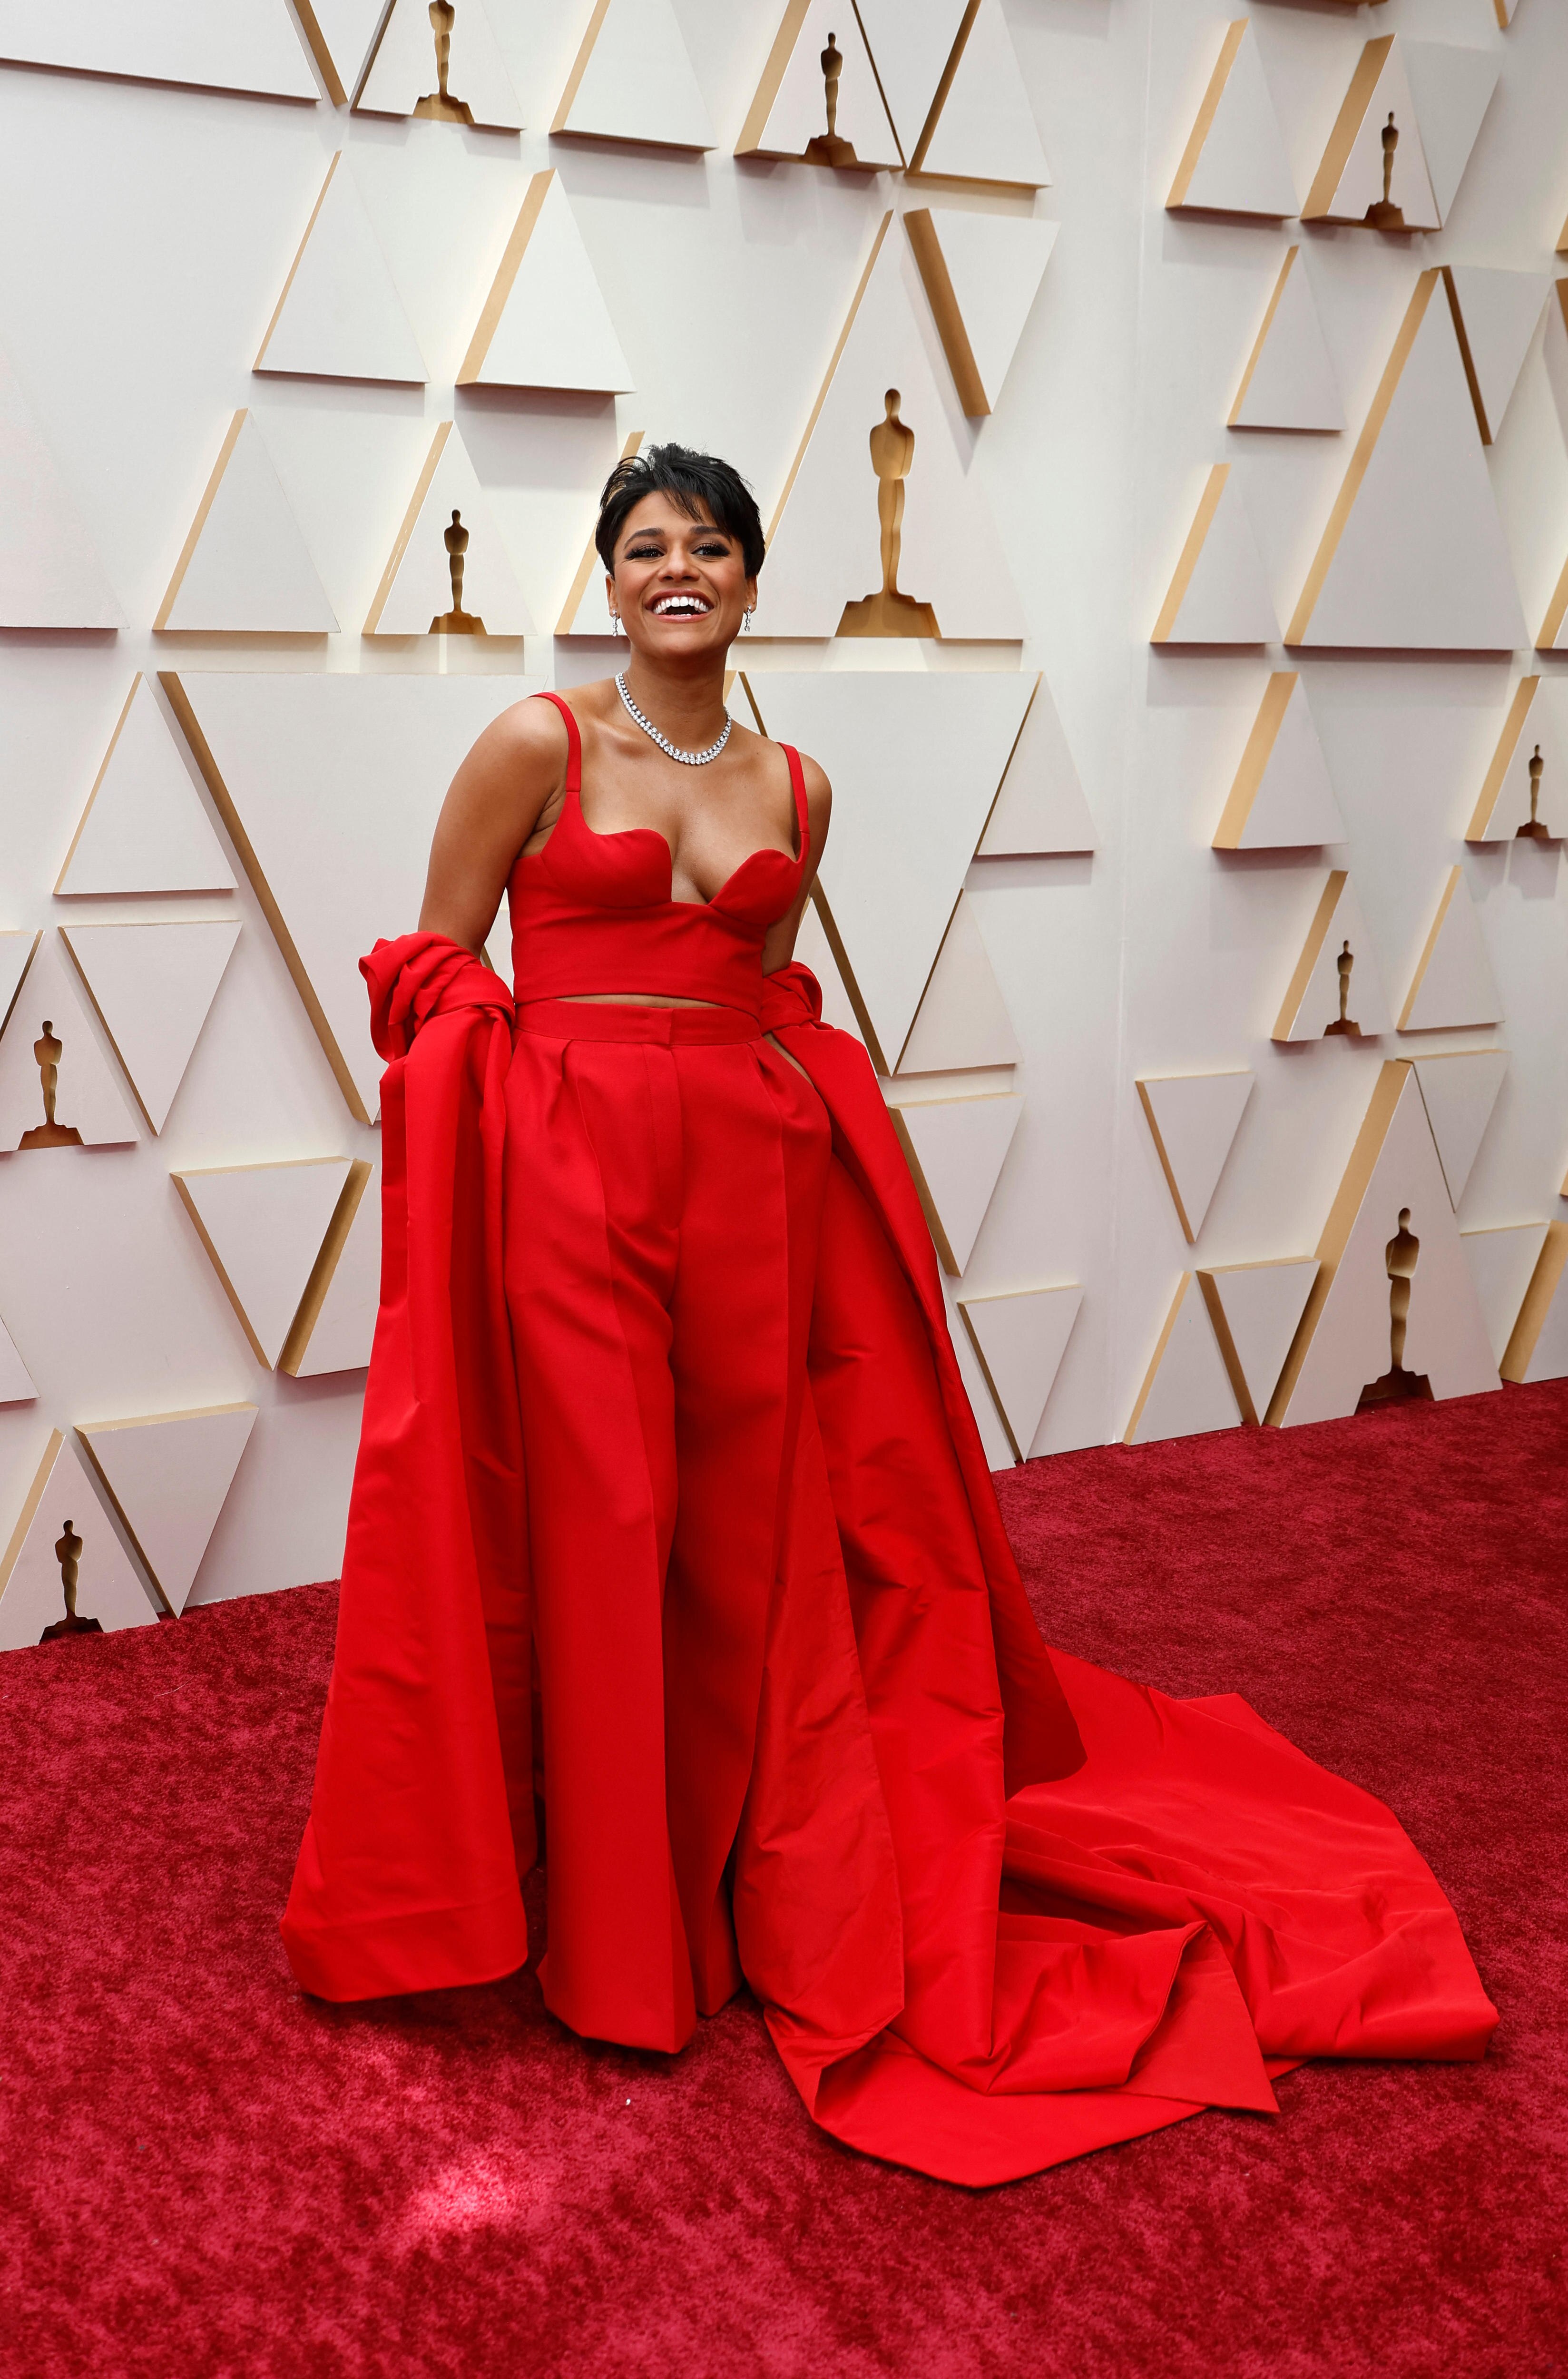 A woman wearing a red gown stands on a red carpet in front of a white media wall at the Oscars.